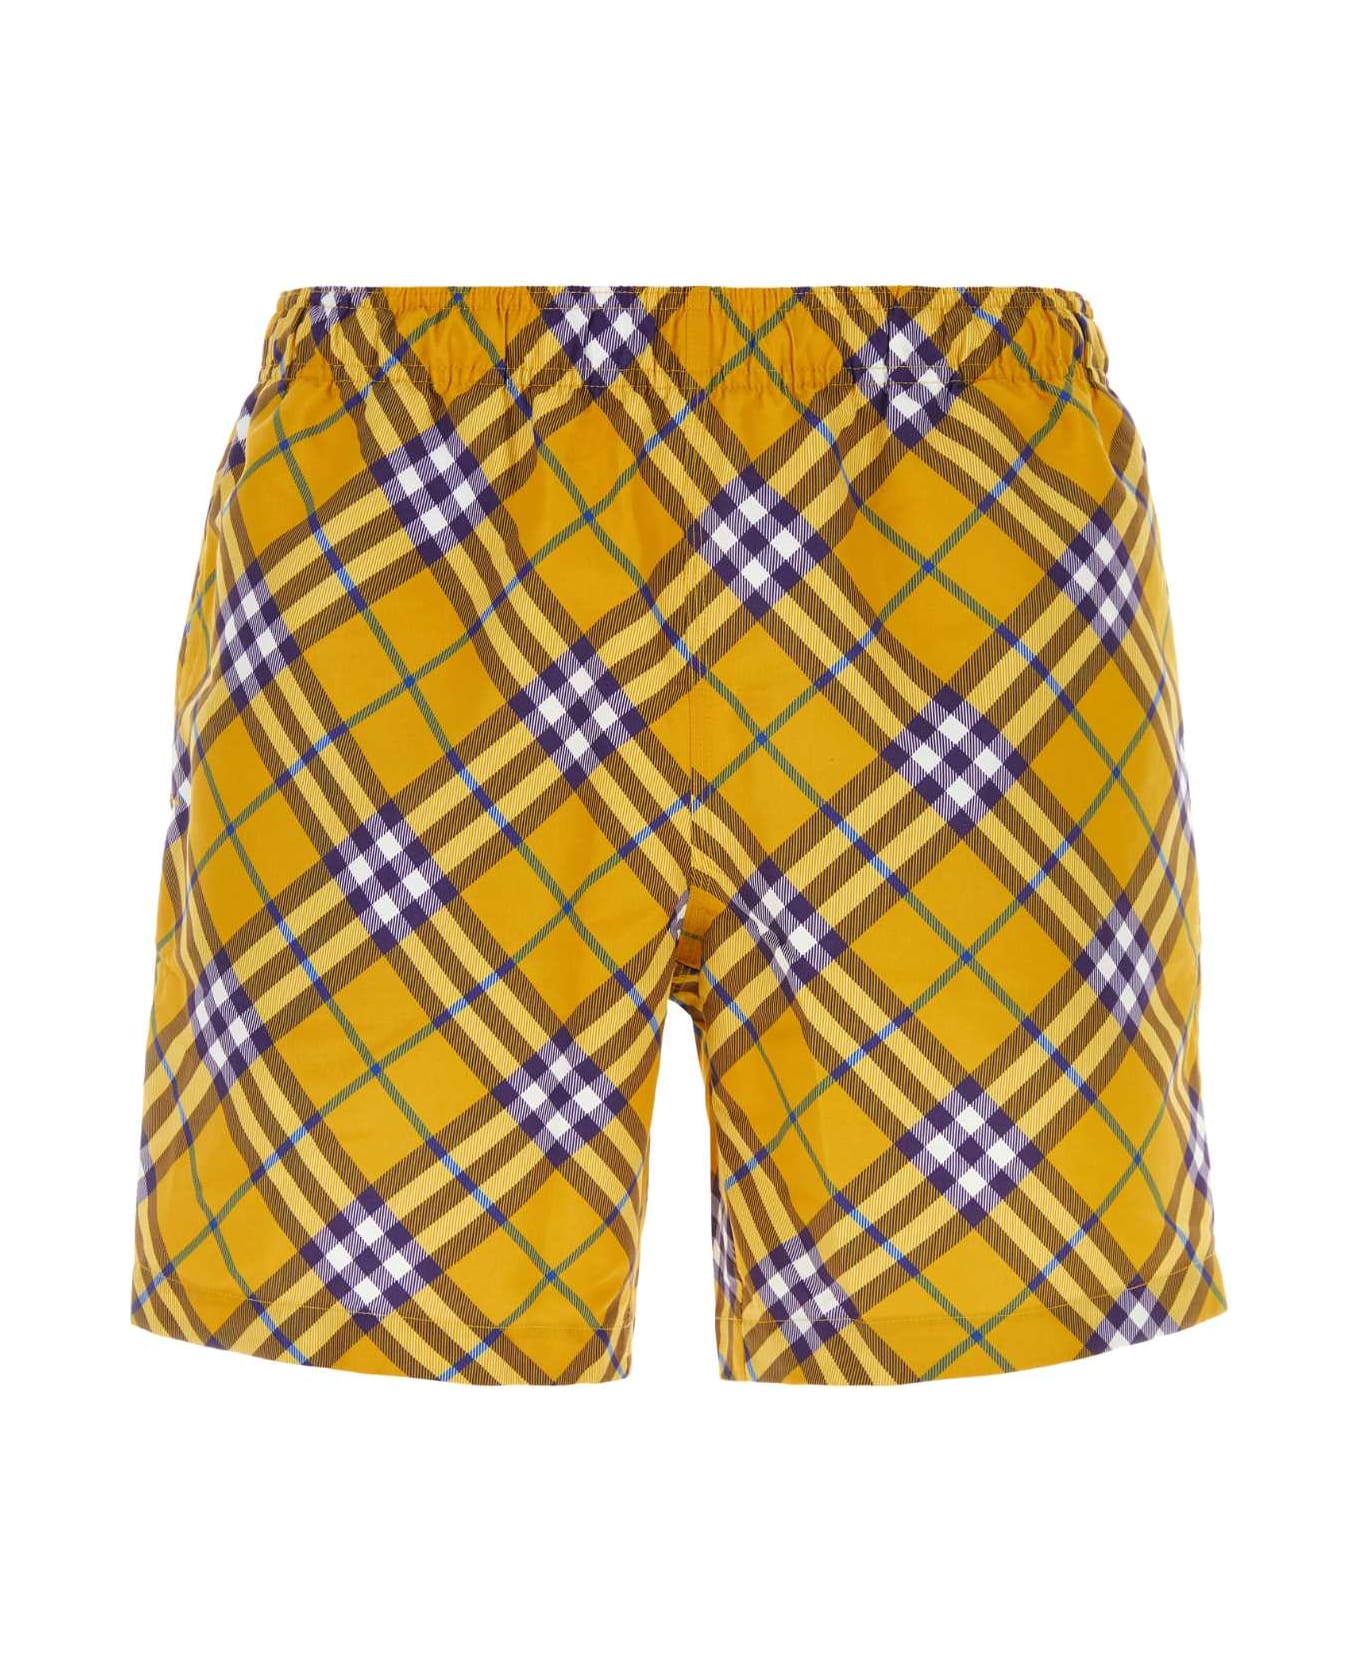 Burberry Printed Polyester Swimming Shorts - PEAR 水着